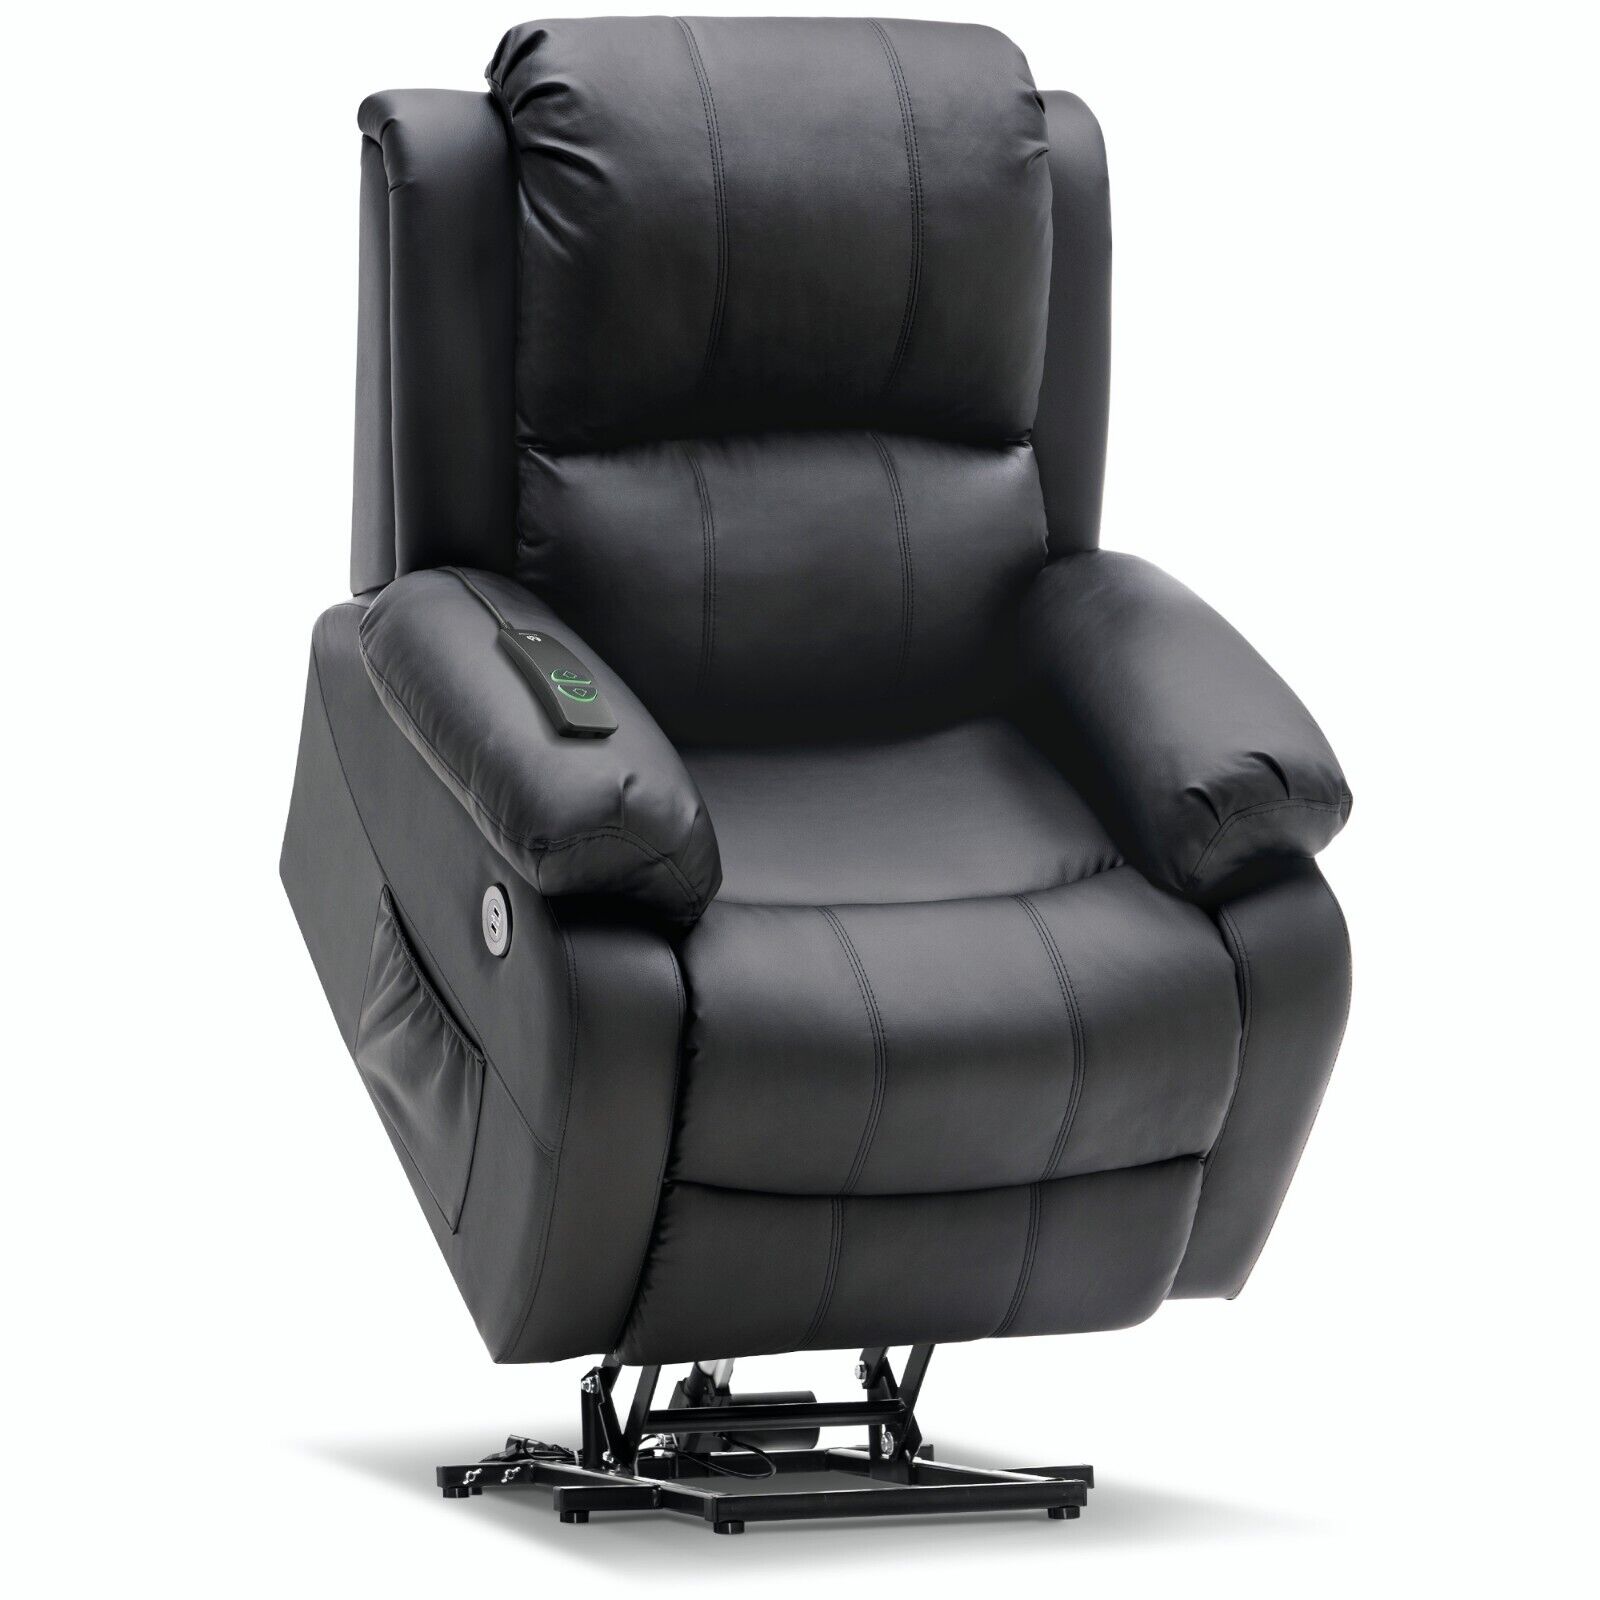 MCombo Small Sized Electric Power Lift Recliner Chair Sofa, Faux Leather 7409